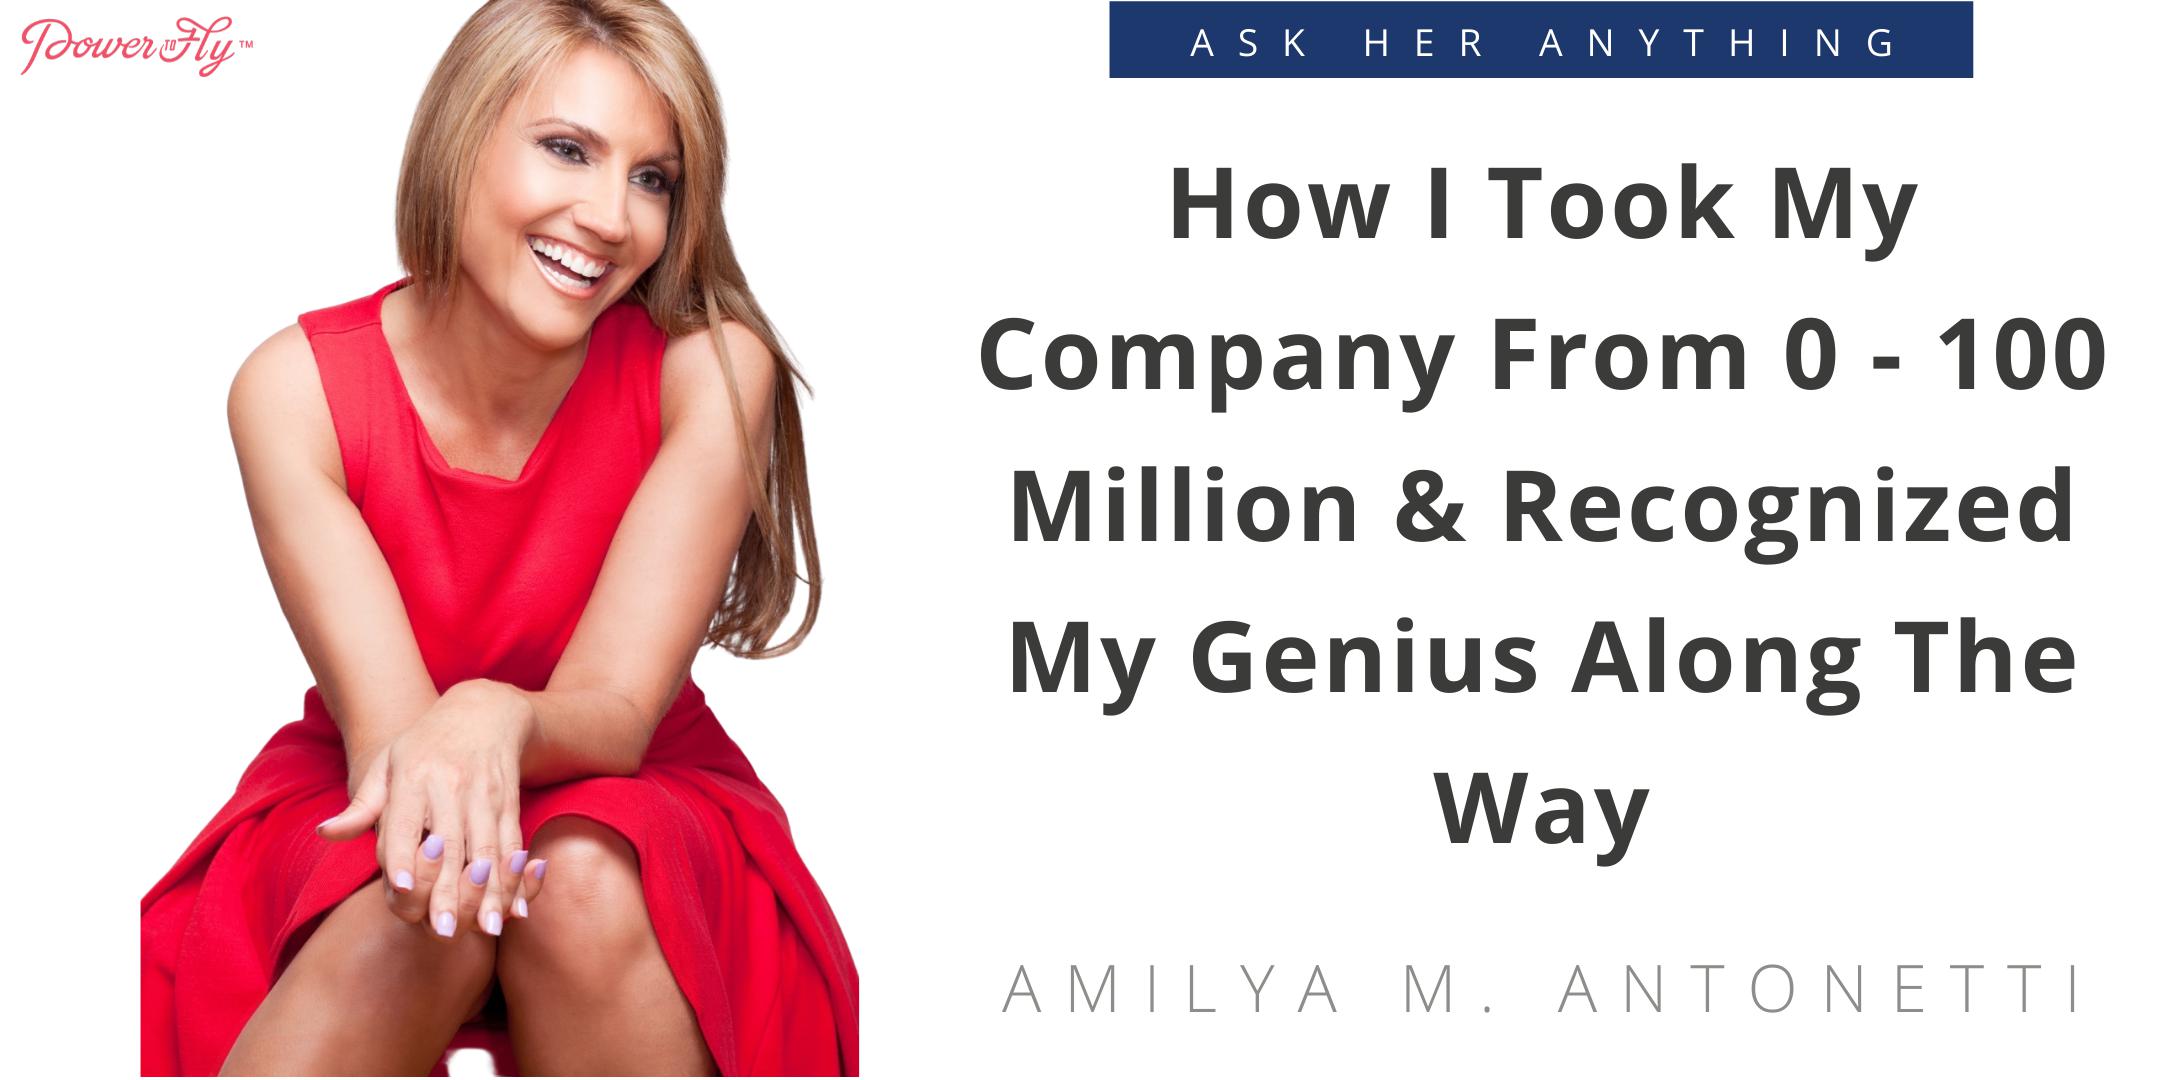 How I Took My Company From 0 - 100 Million & Recognized My Genius Along The Way